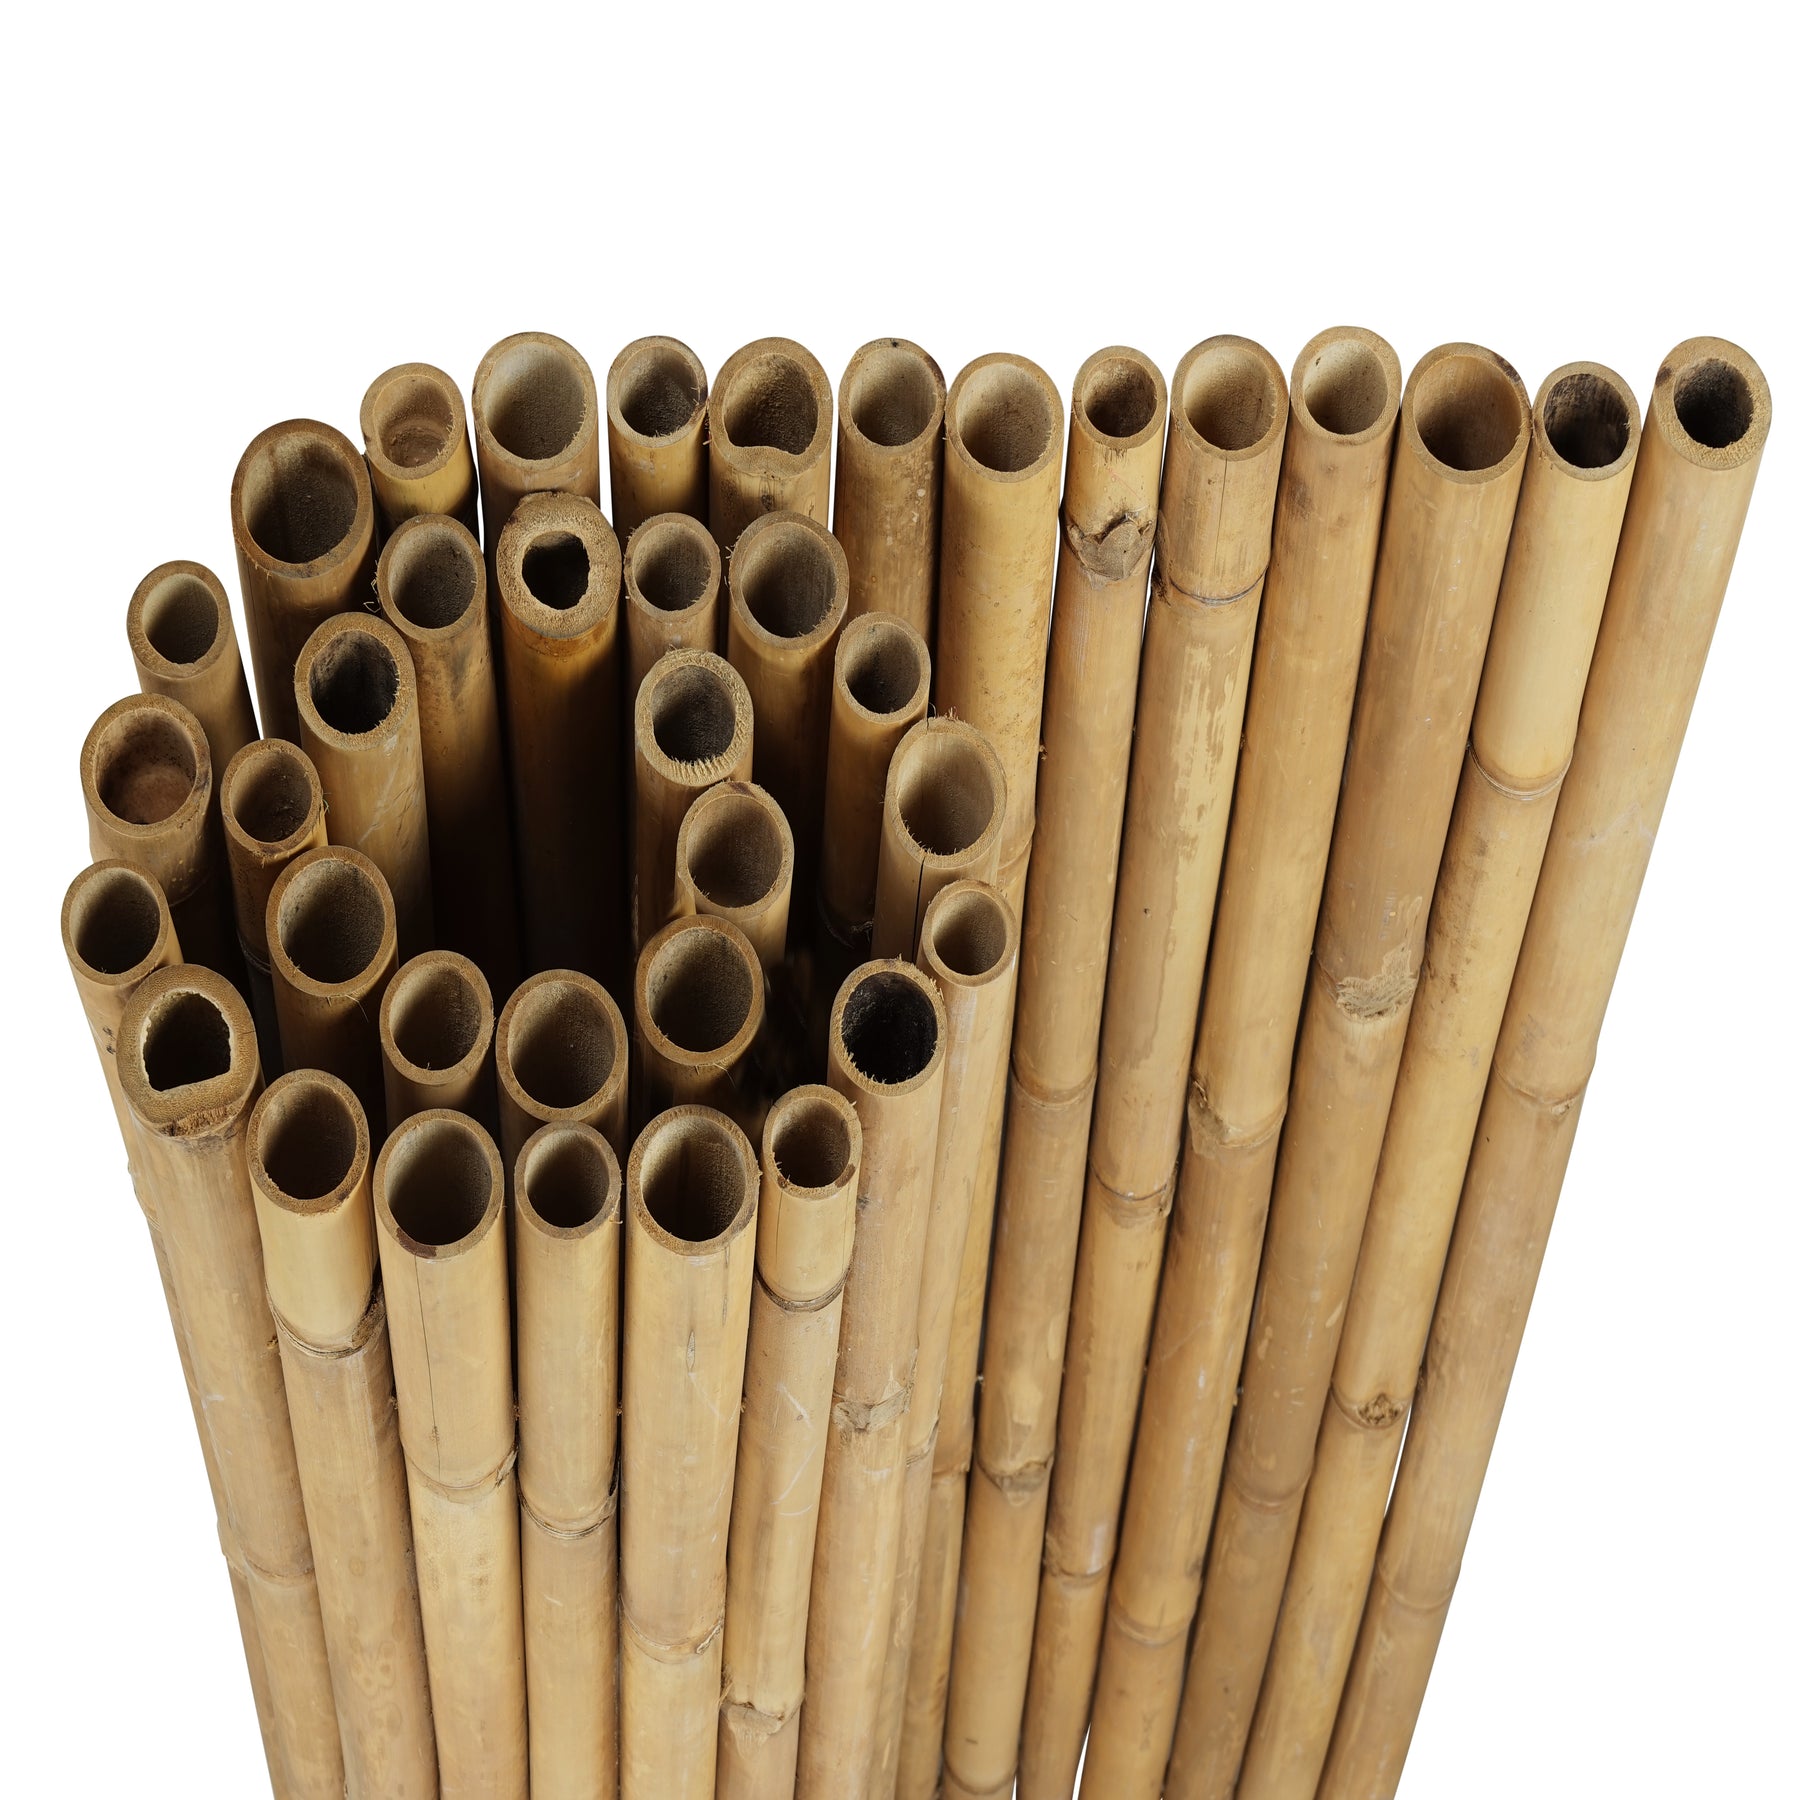 Bamboo Fence Roll Deluxe Natural